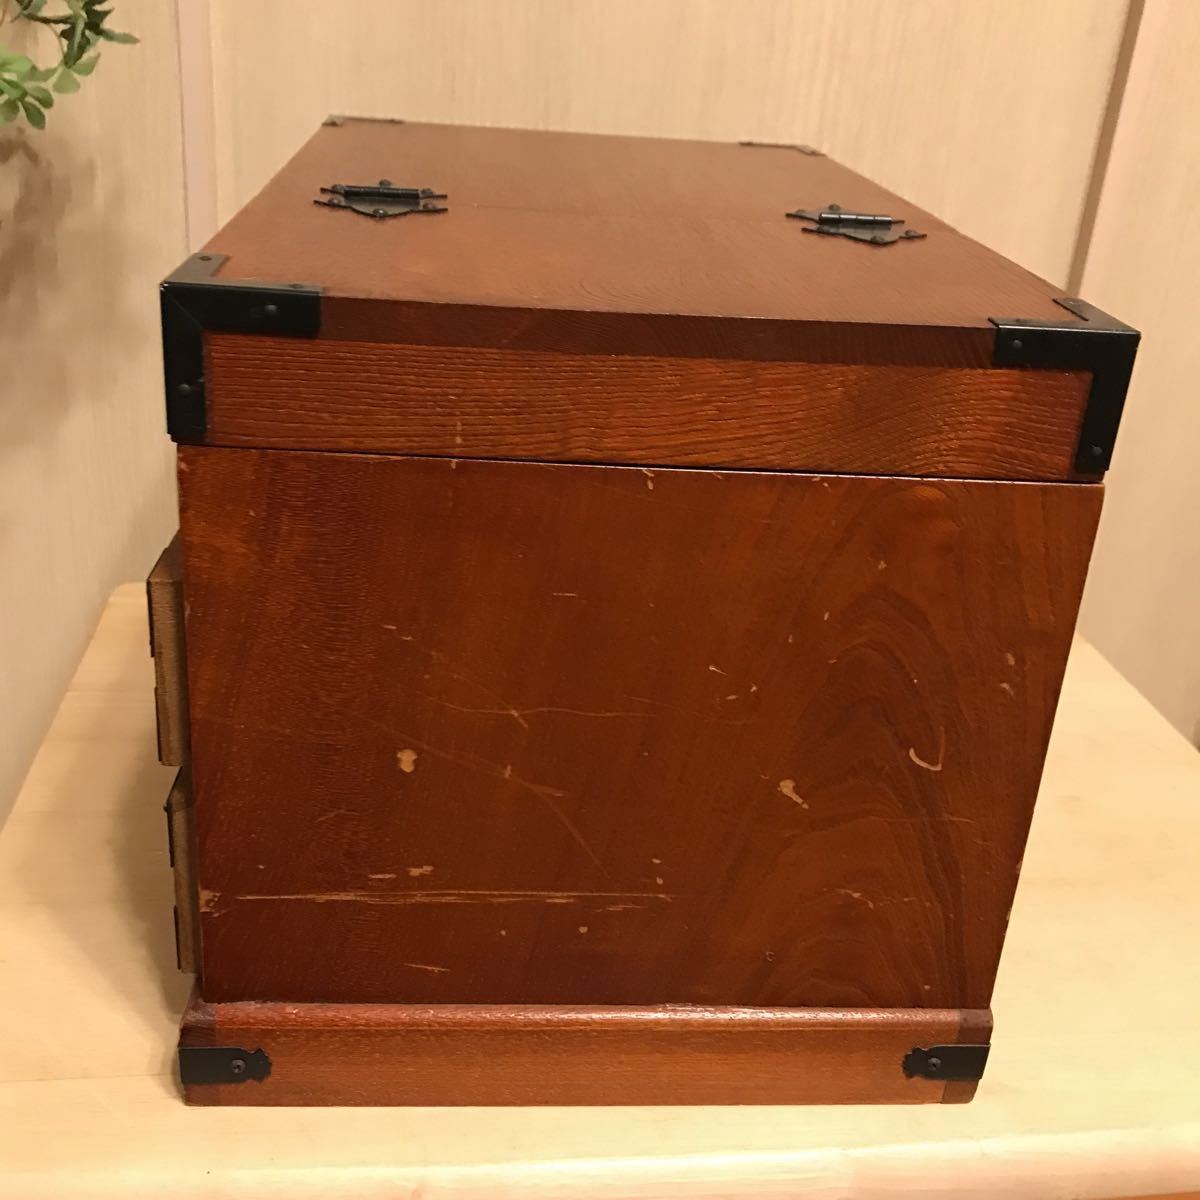  antique | retro sewing box old .. drawer small articles go in peace furniture . needle box old tool nationwide free shipping!1015-7